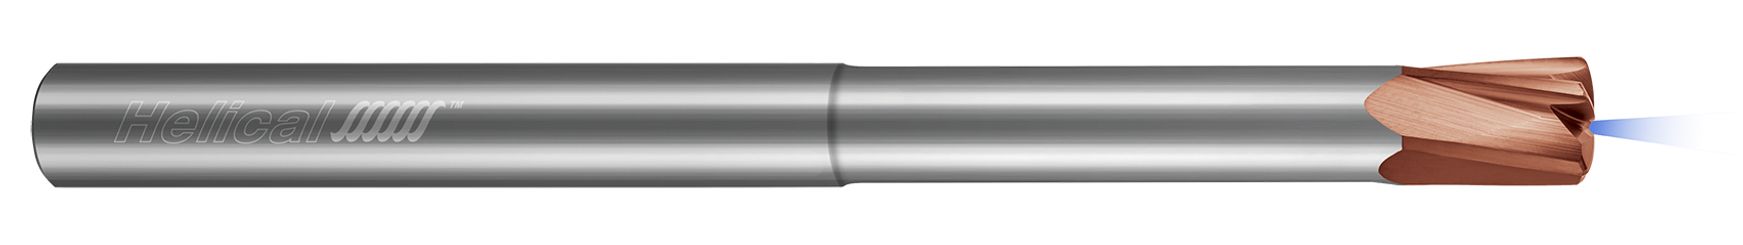 High Feed End Mills - Steels up to 45 Rc - Metric - Variable Pitch - Coolant Through - Reduced Neck